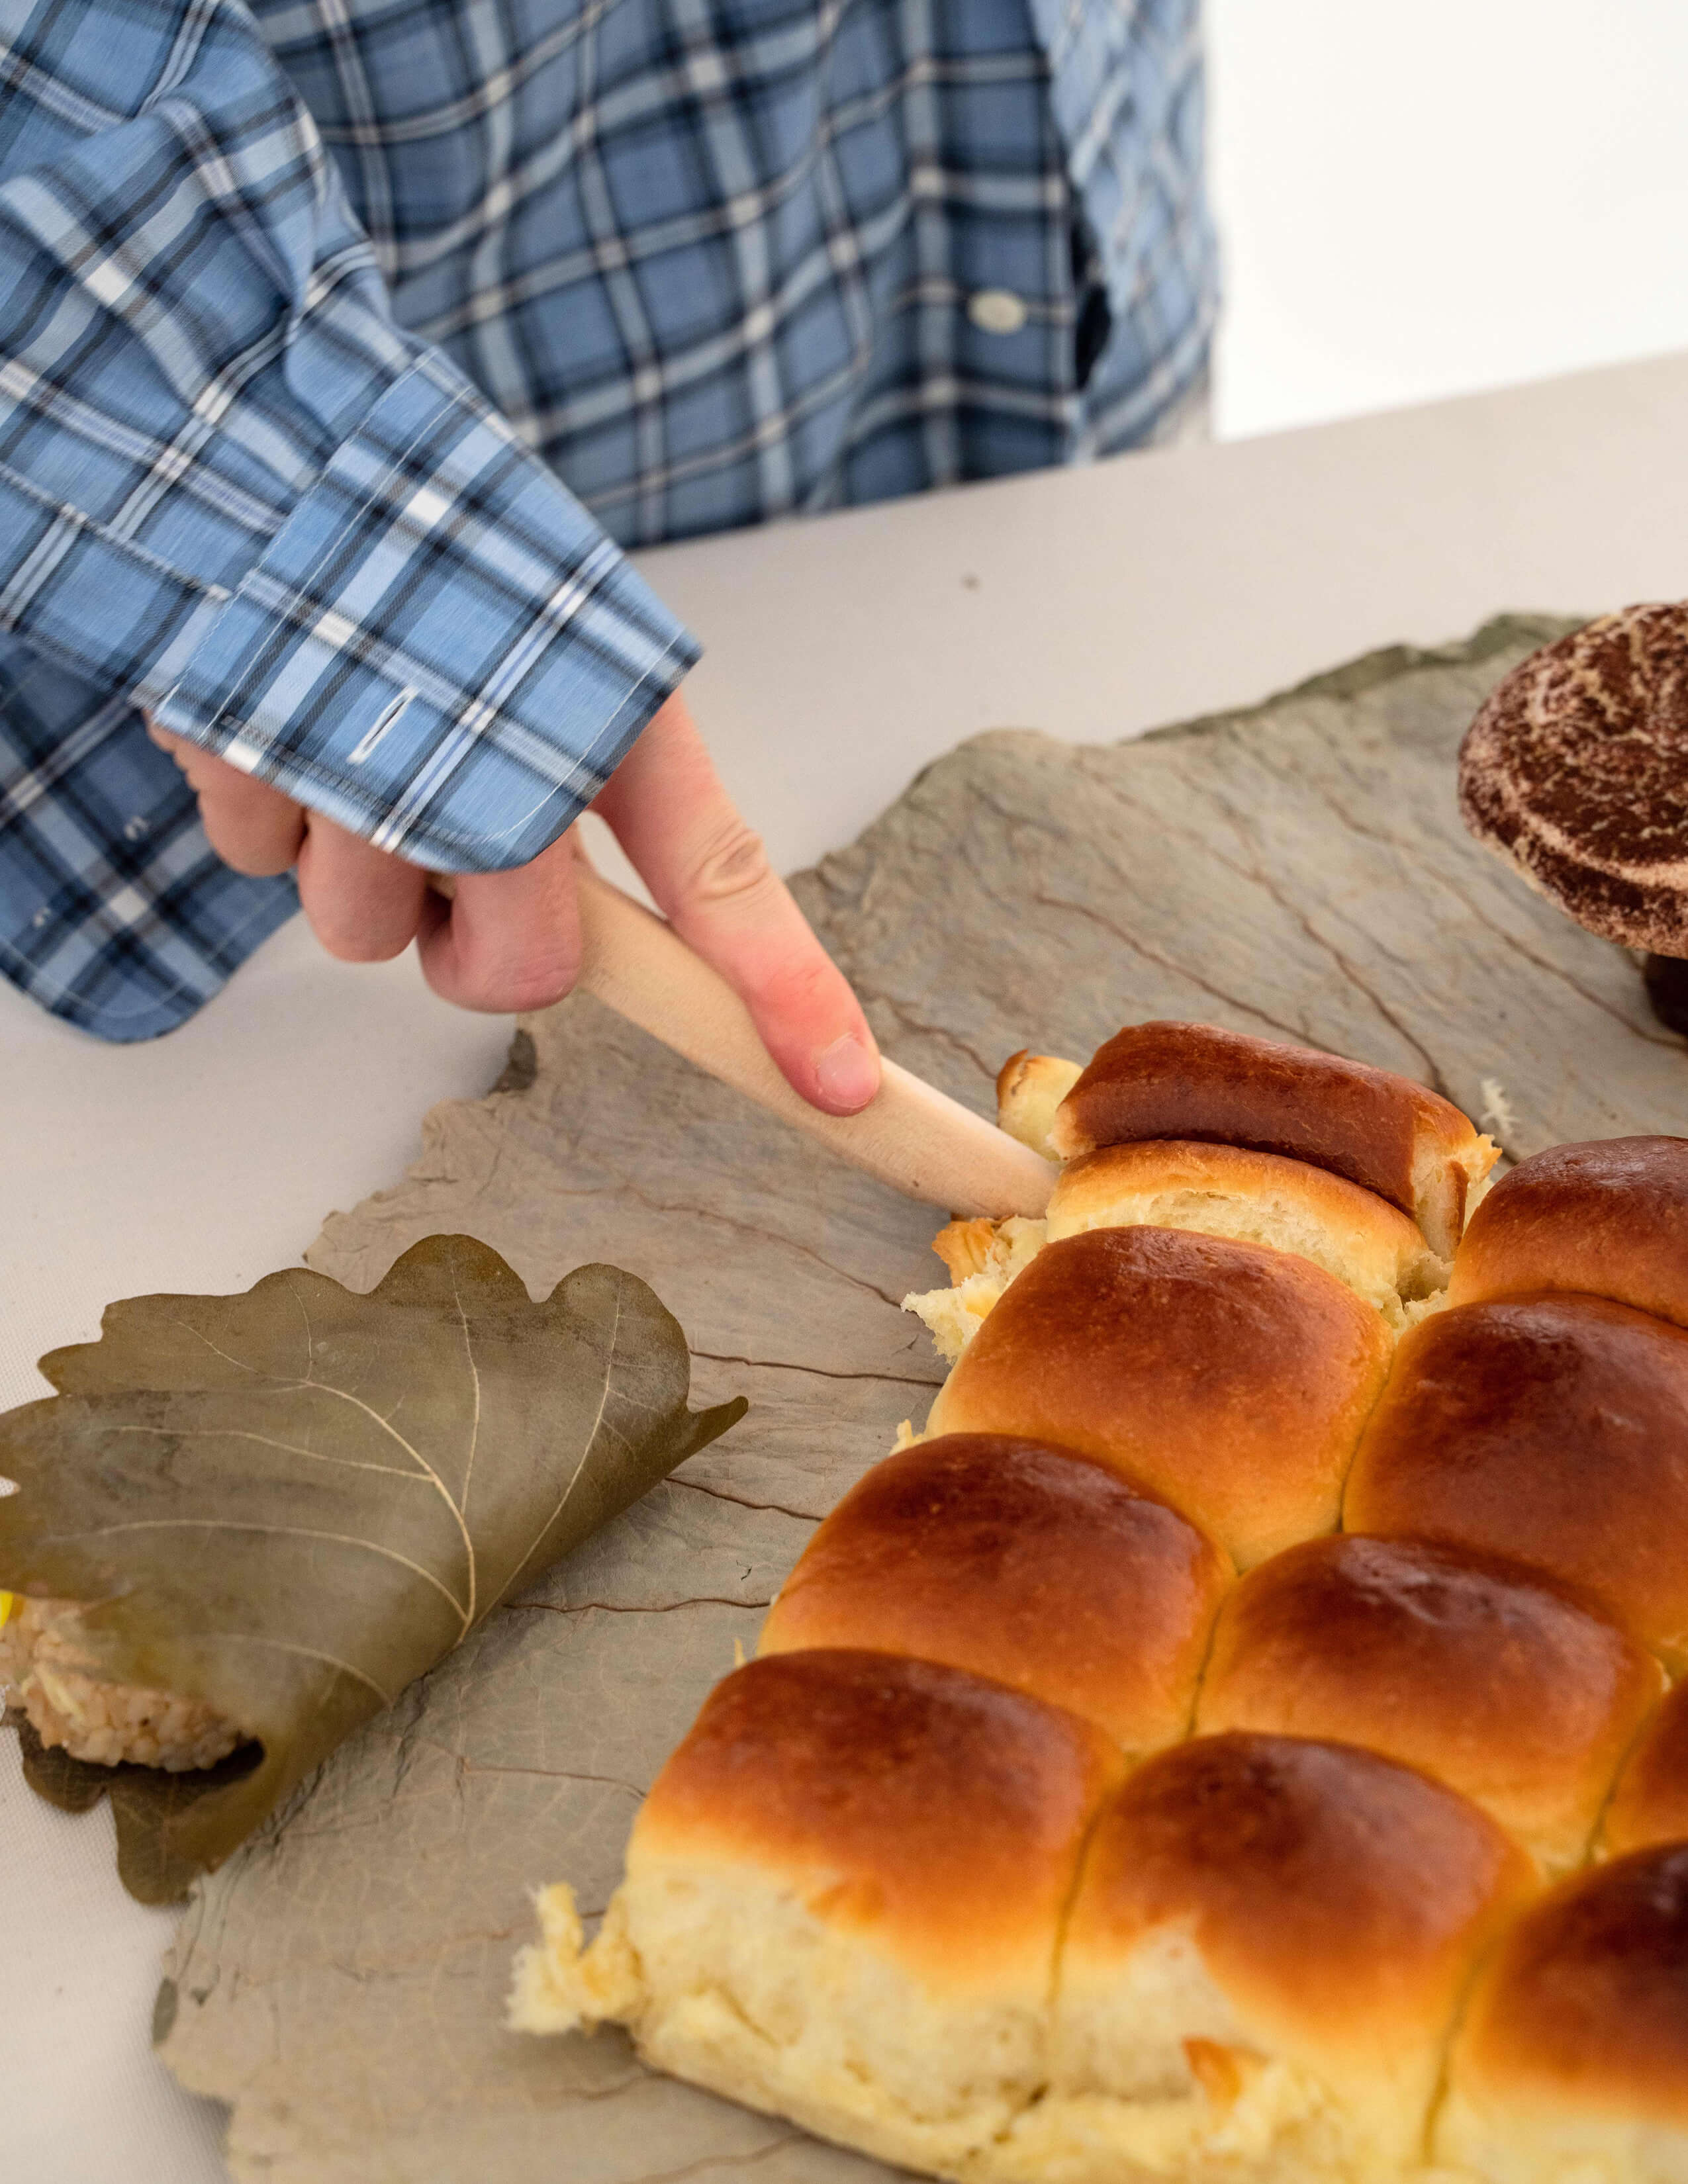 A person cuts the bread that is served on a big piece of leaf.